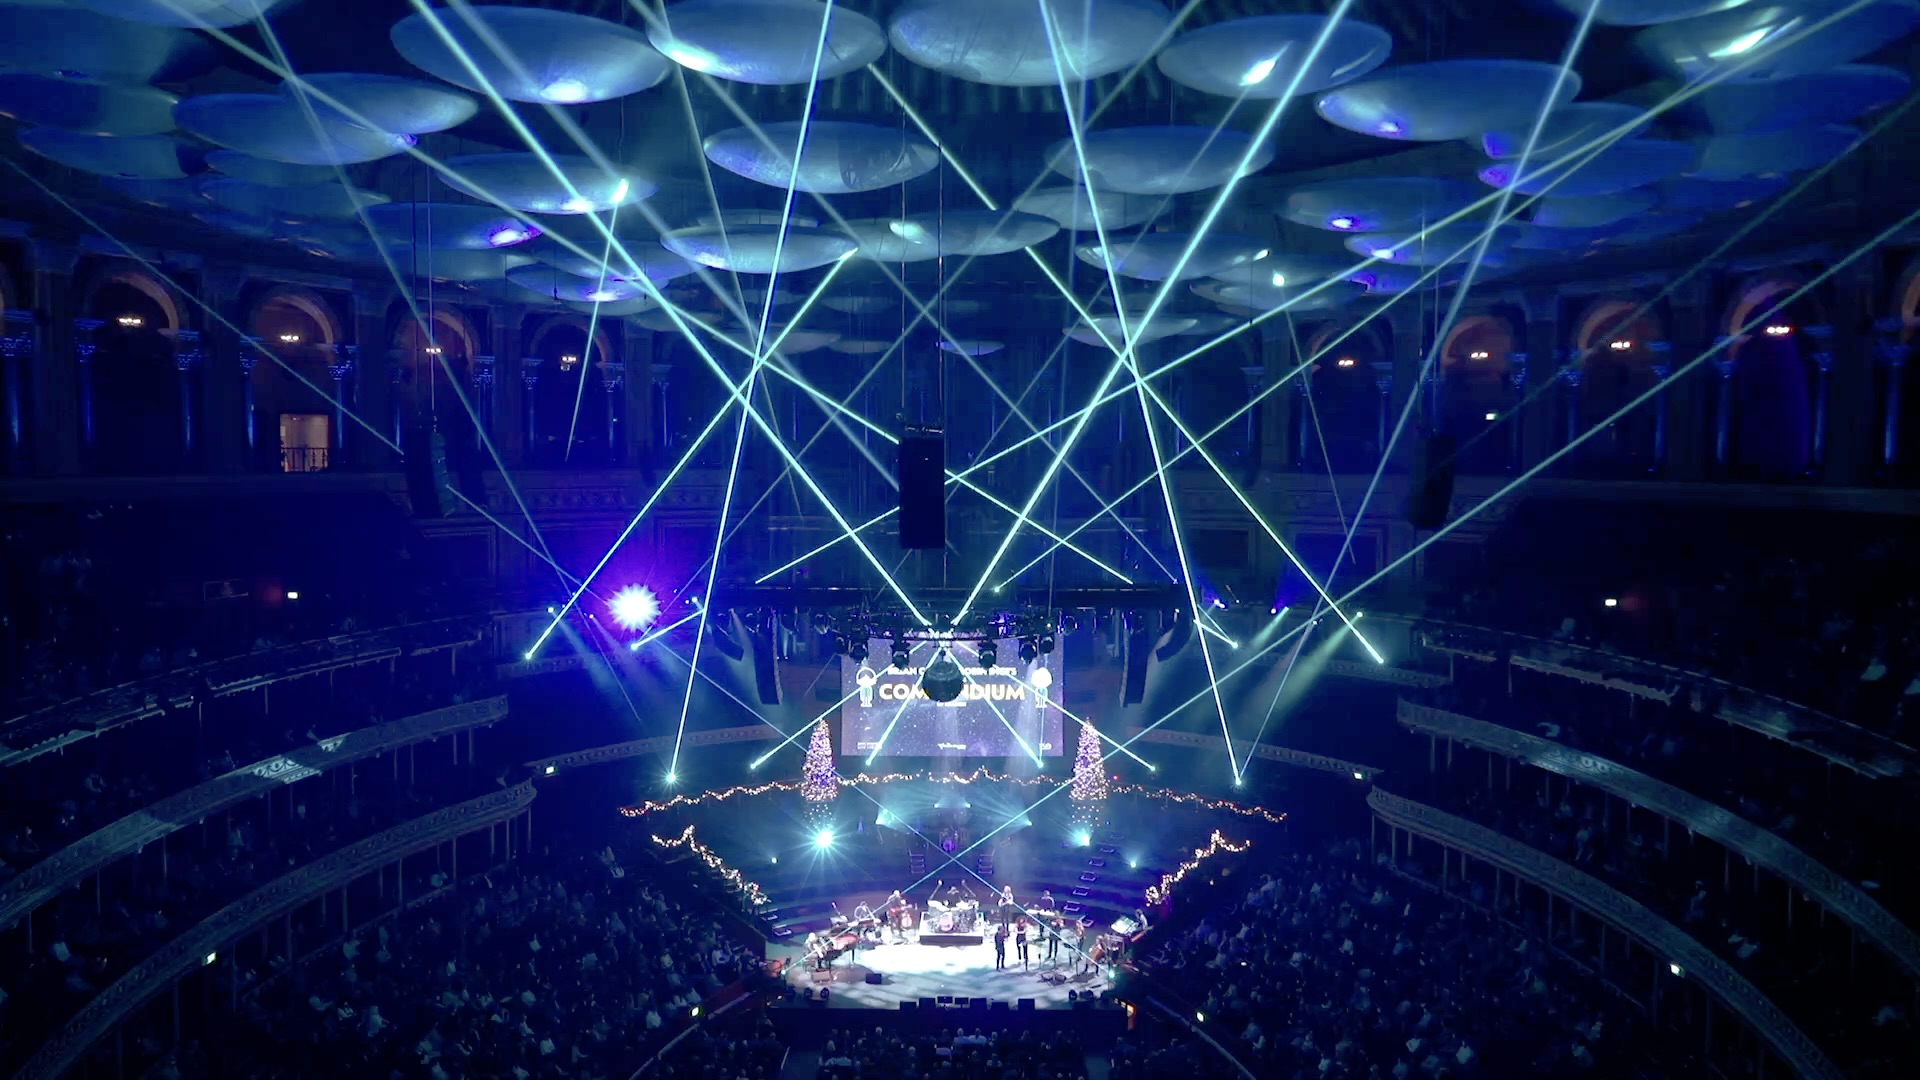 Nitin Sawheney performing at the Royal Albert Hall with lasers across the entire venue